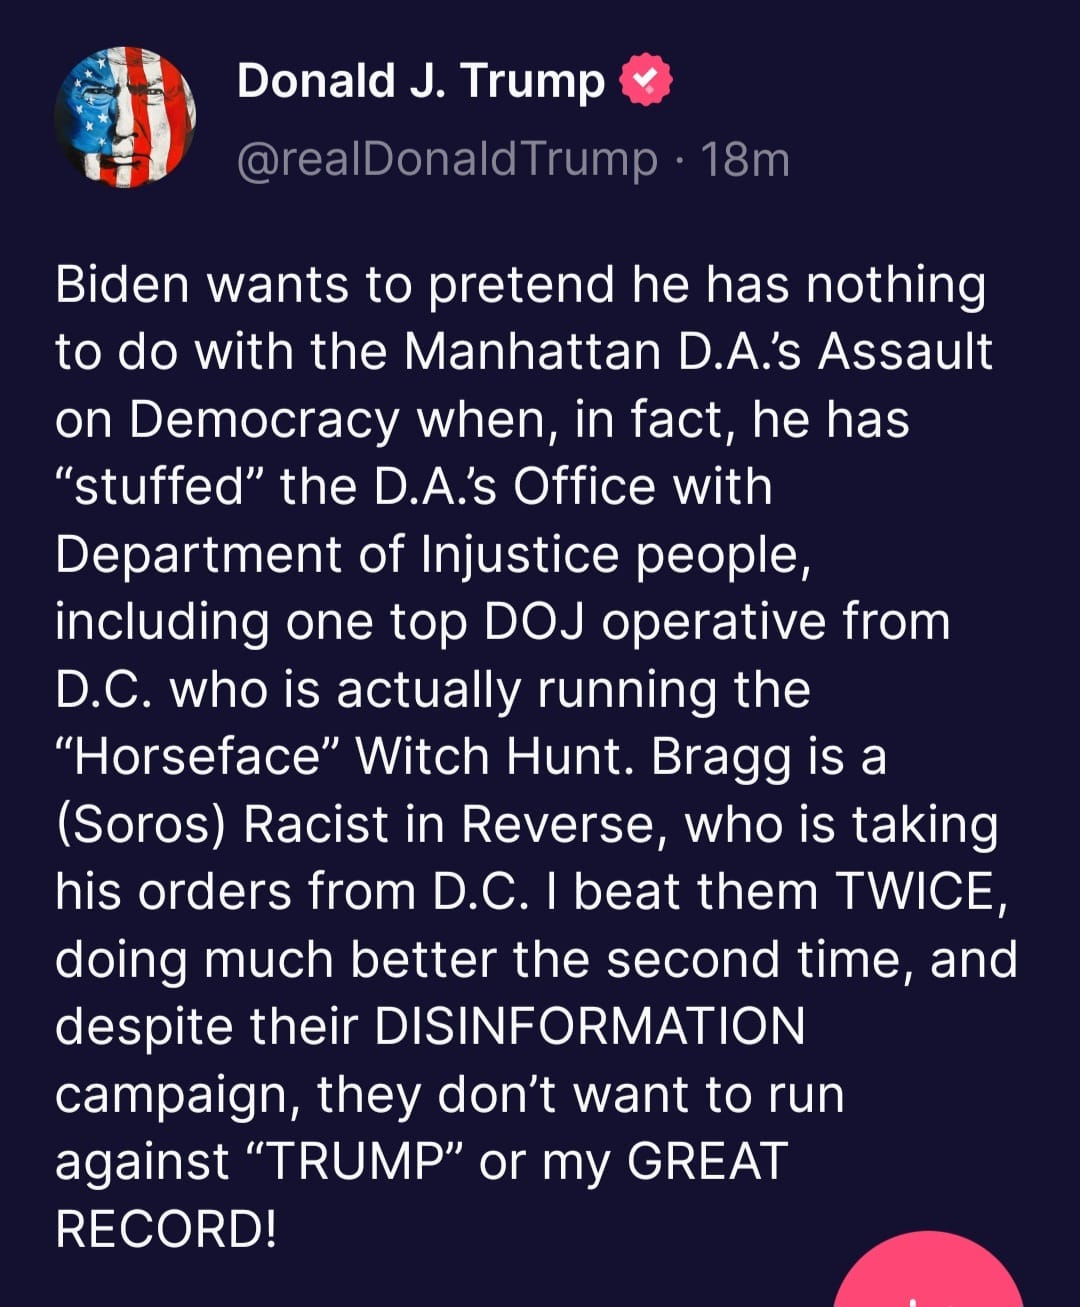 May be an image of text that says 'Donald J. Trump @realDonaldT Trump 18m Biden wants to pretend he has nothing to do with the Manhattan D.A.'s Assault on Democracy when, in fact, he has "stuffed" the D.A.s Office with Department of Injustice people, including one top DOJ operative from D.C. who is actually running the "Horseface" Witch Hunt. Bragg is a (Soros) Racist in Reverse who is taking his orders from D.C. beat them TWICE, doing much better the second time, and despite their DISINFORMATION campaign, they don't want to run against "TRUMP" or my GREAT RECORD!'